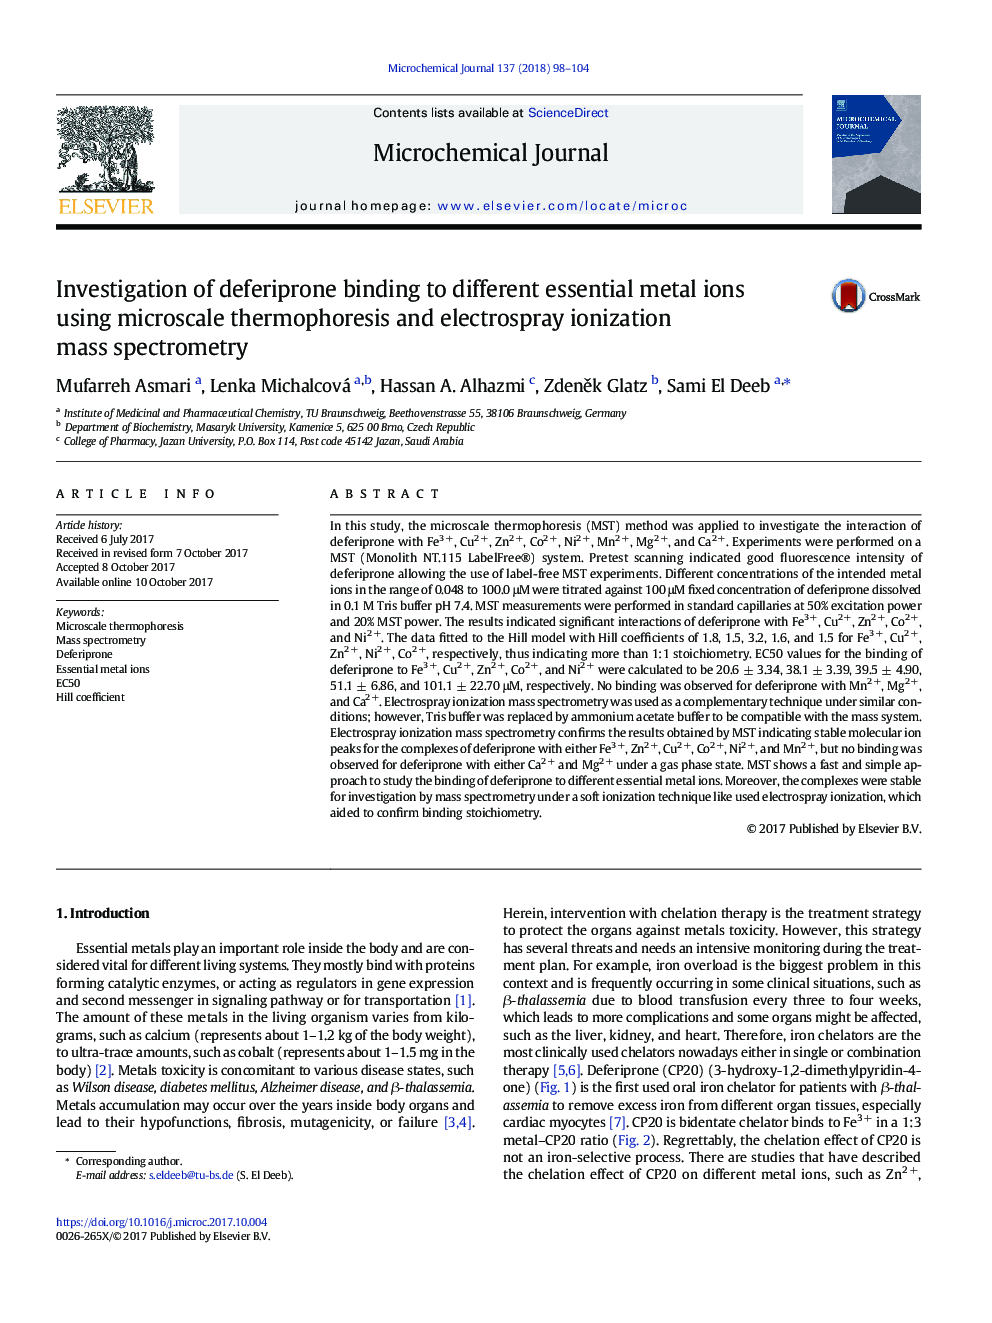 Investigation of deferiprone binding to different essential metal ions using microscale thermophoresis and electrospray ionization mass spectrometry